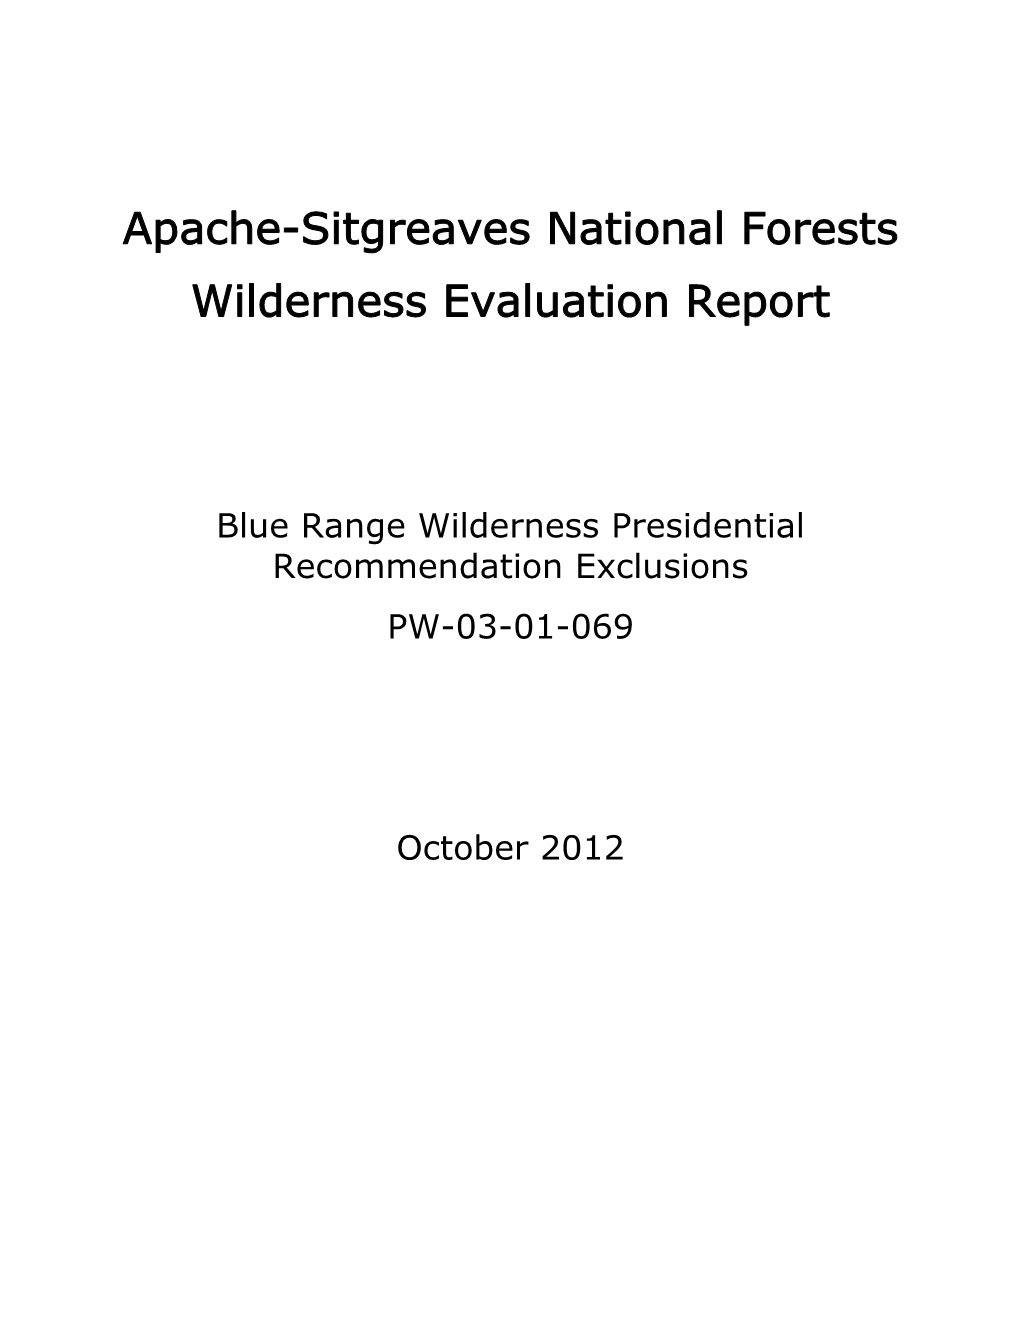 Blue Range Wilderness Presidential Recommendation Exclusions PW-03-01-069